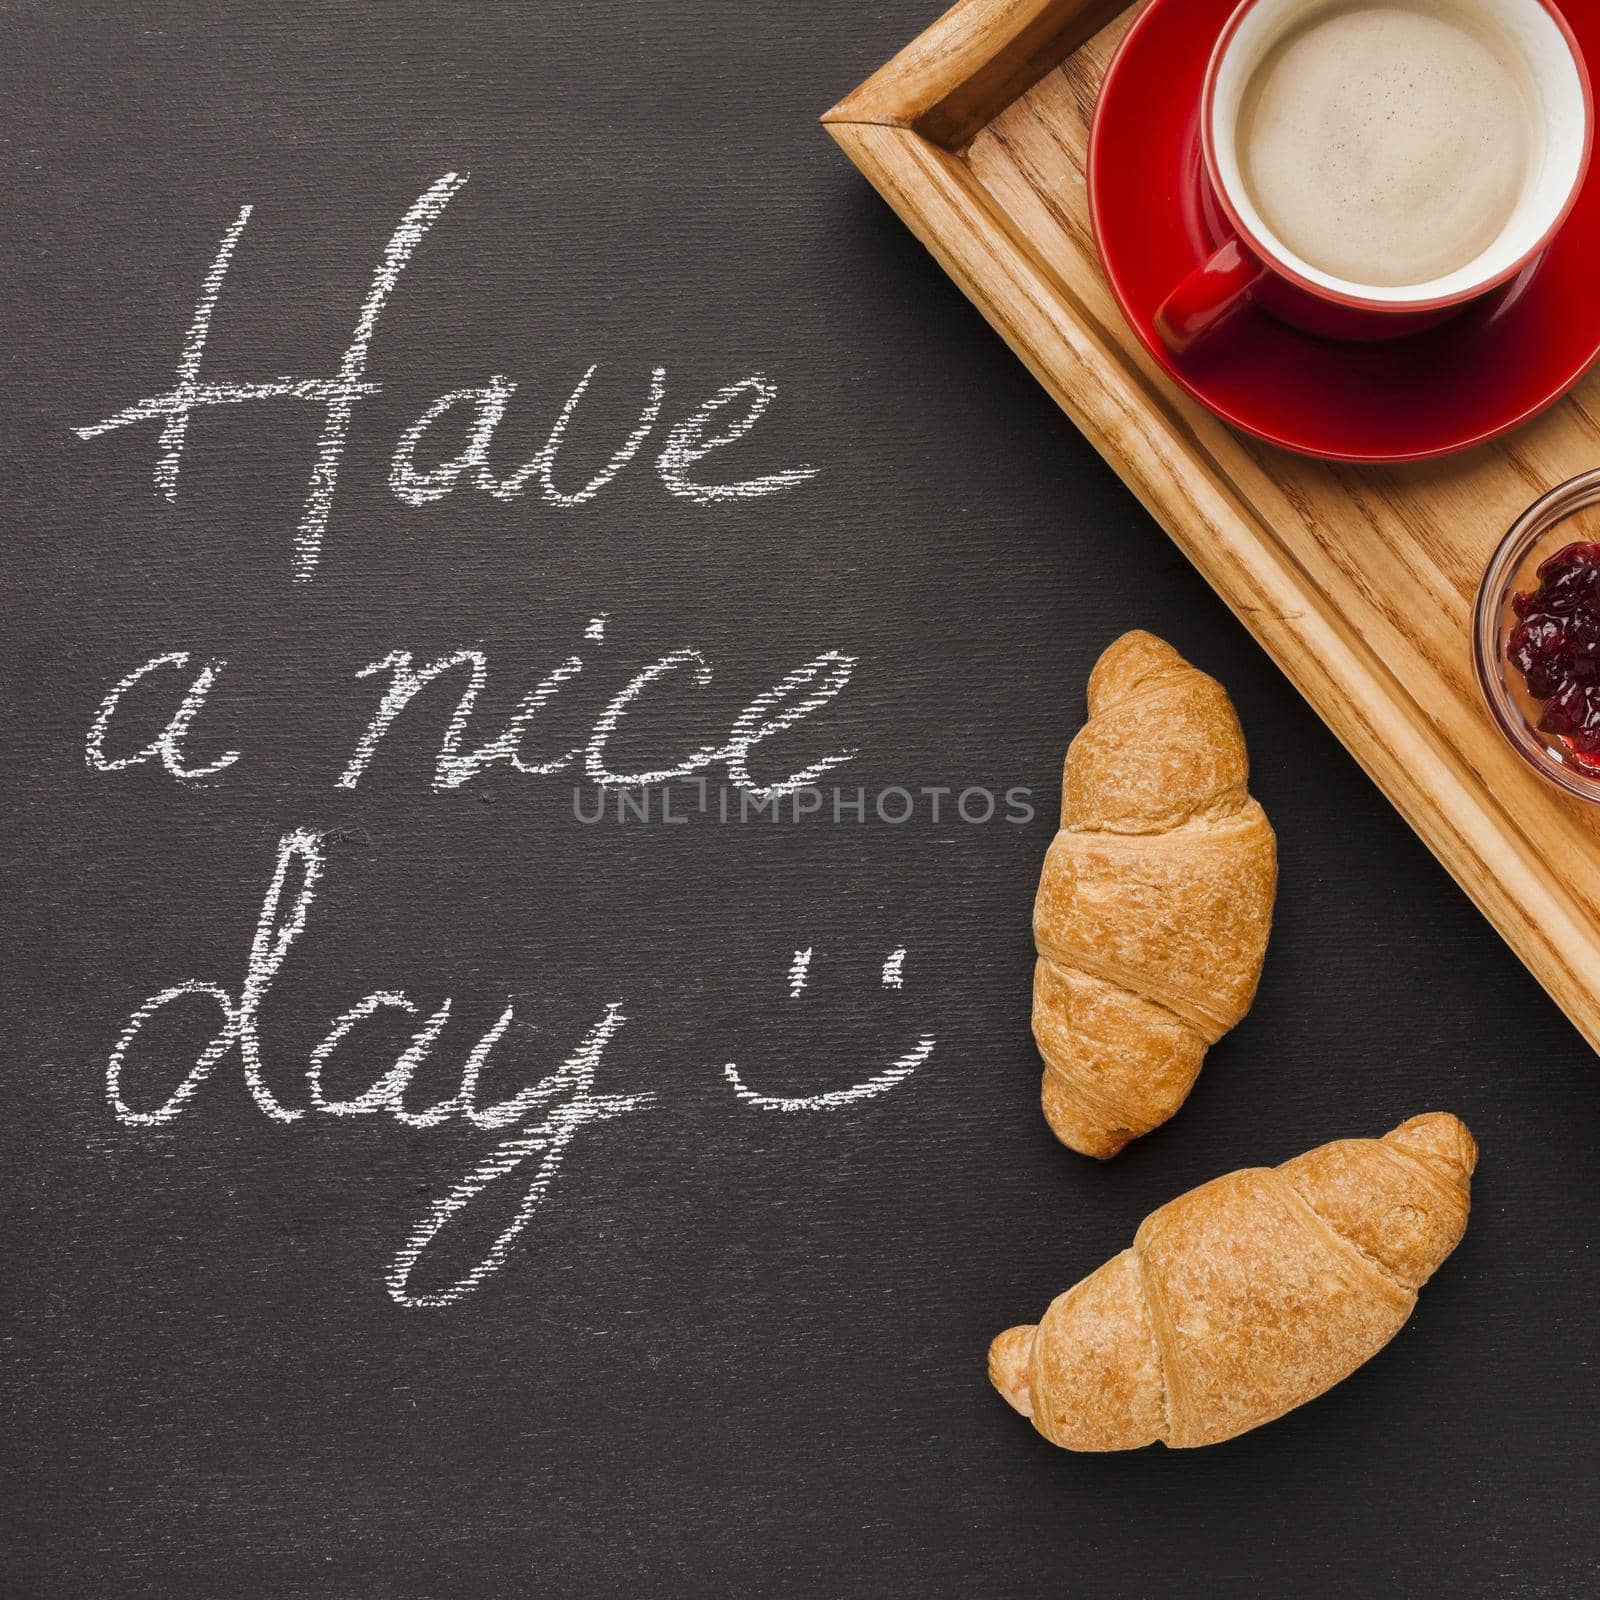 have nice day message with breakfast